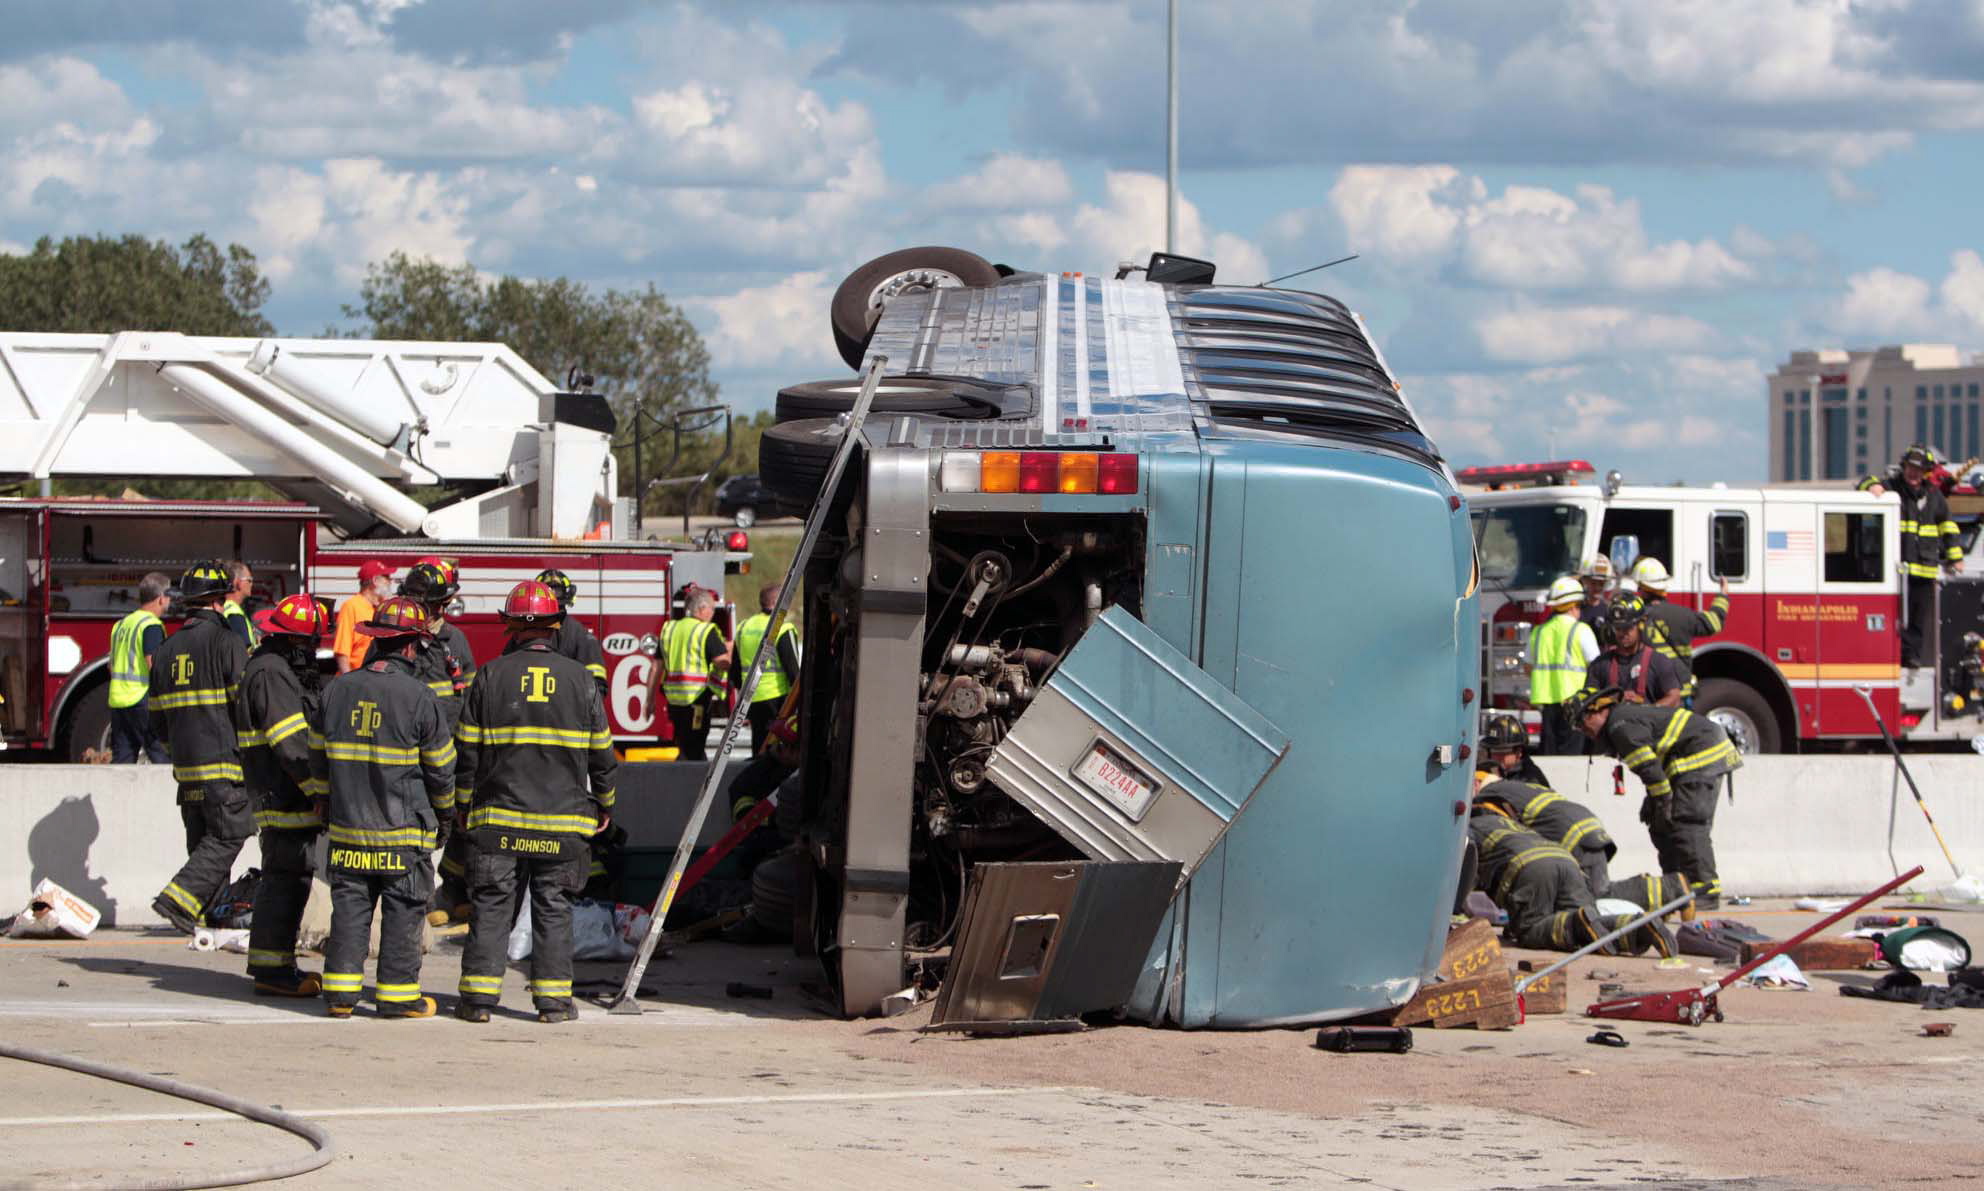 Firefighters work to extricate people from a bus crash Saturday in Indianapolis.